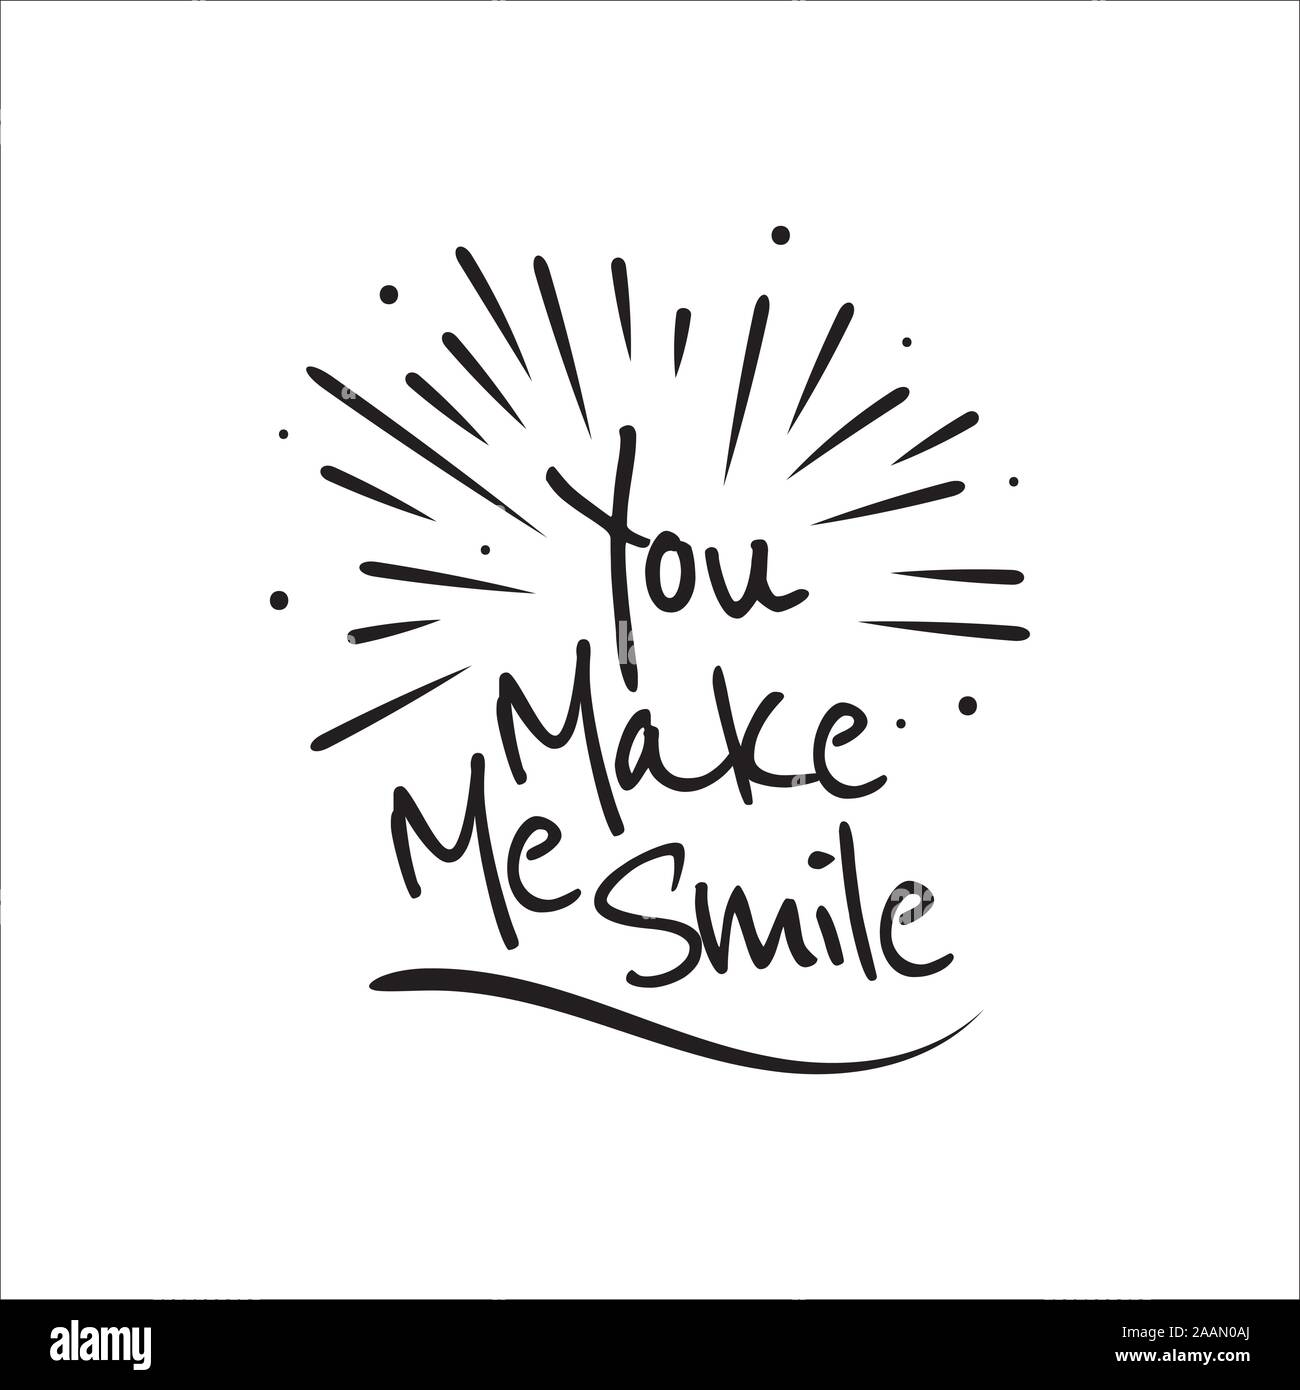 you make me smile lettering. stylist black Letter of inspirational positive quote vector. Simple decorated hand lettered quote illustration template. Stock Vector